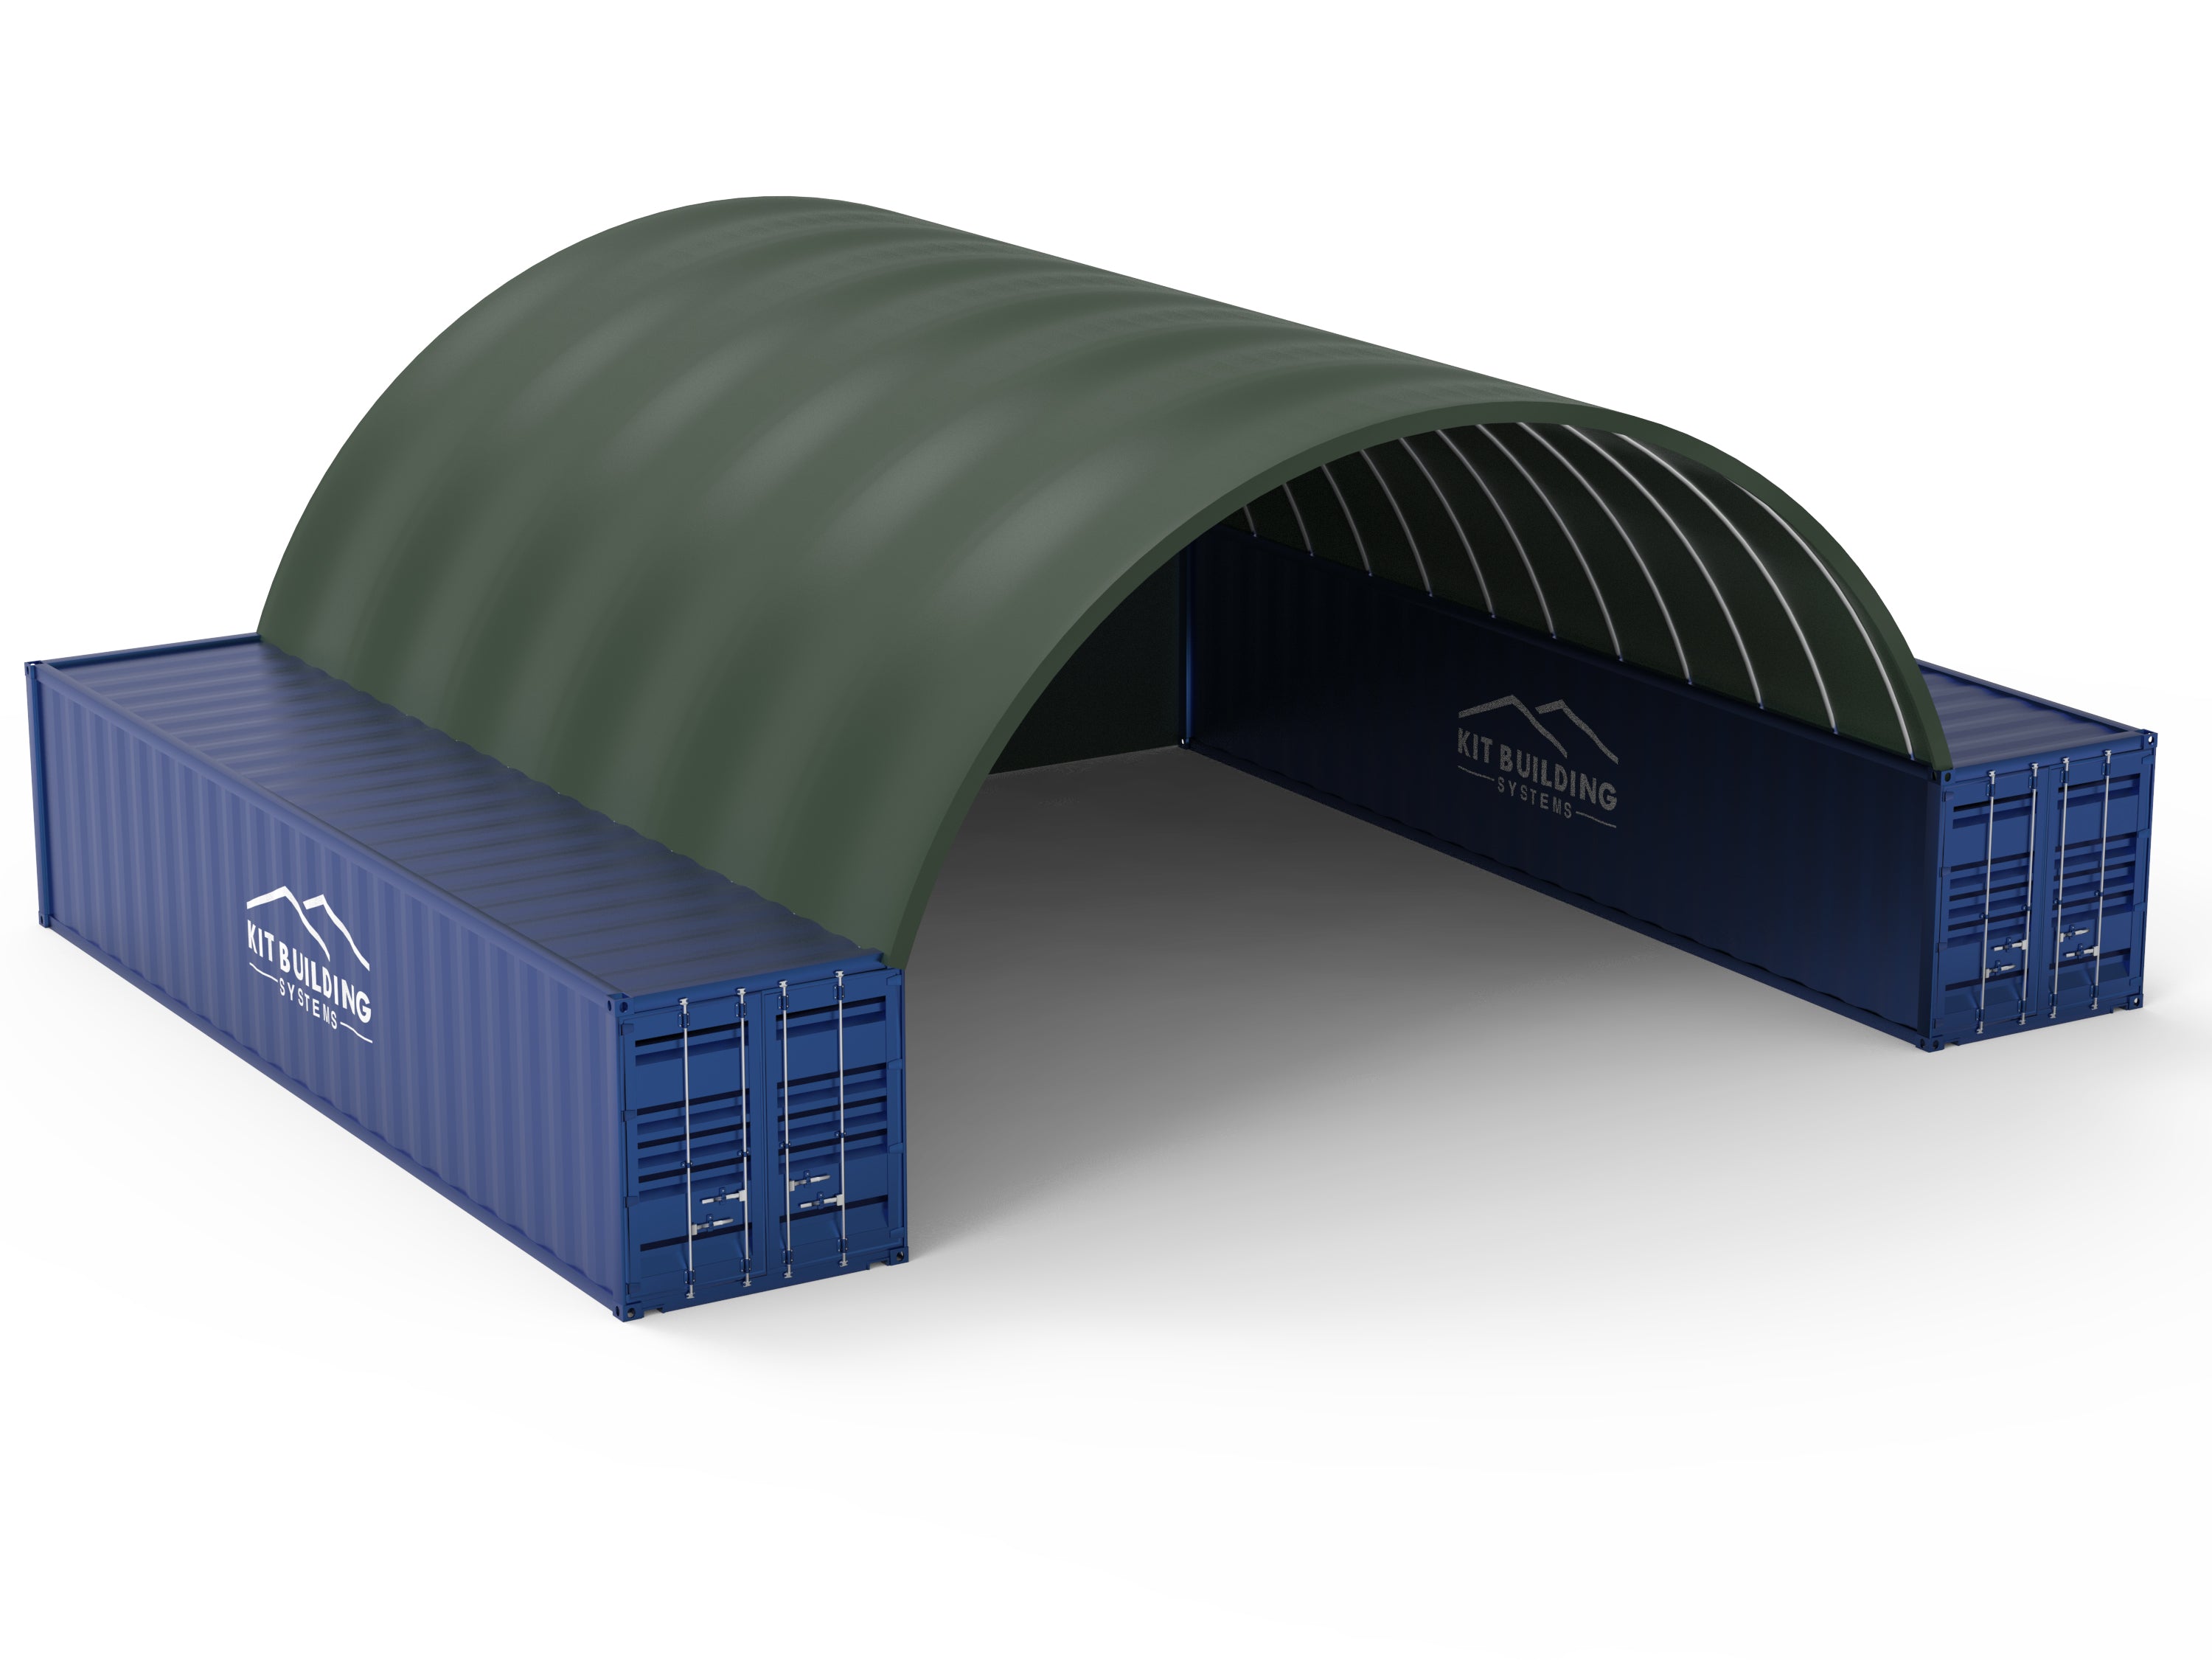 10m x 12m - Container Spanz shelter - Engineered NZ tough and at a